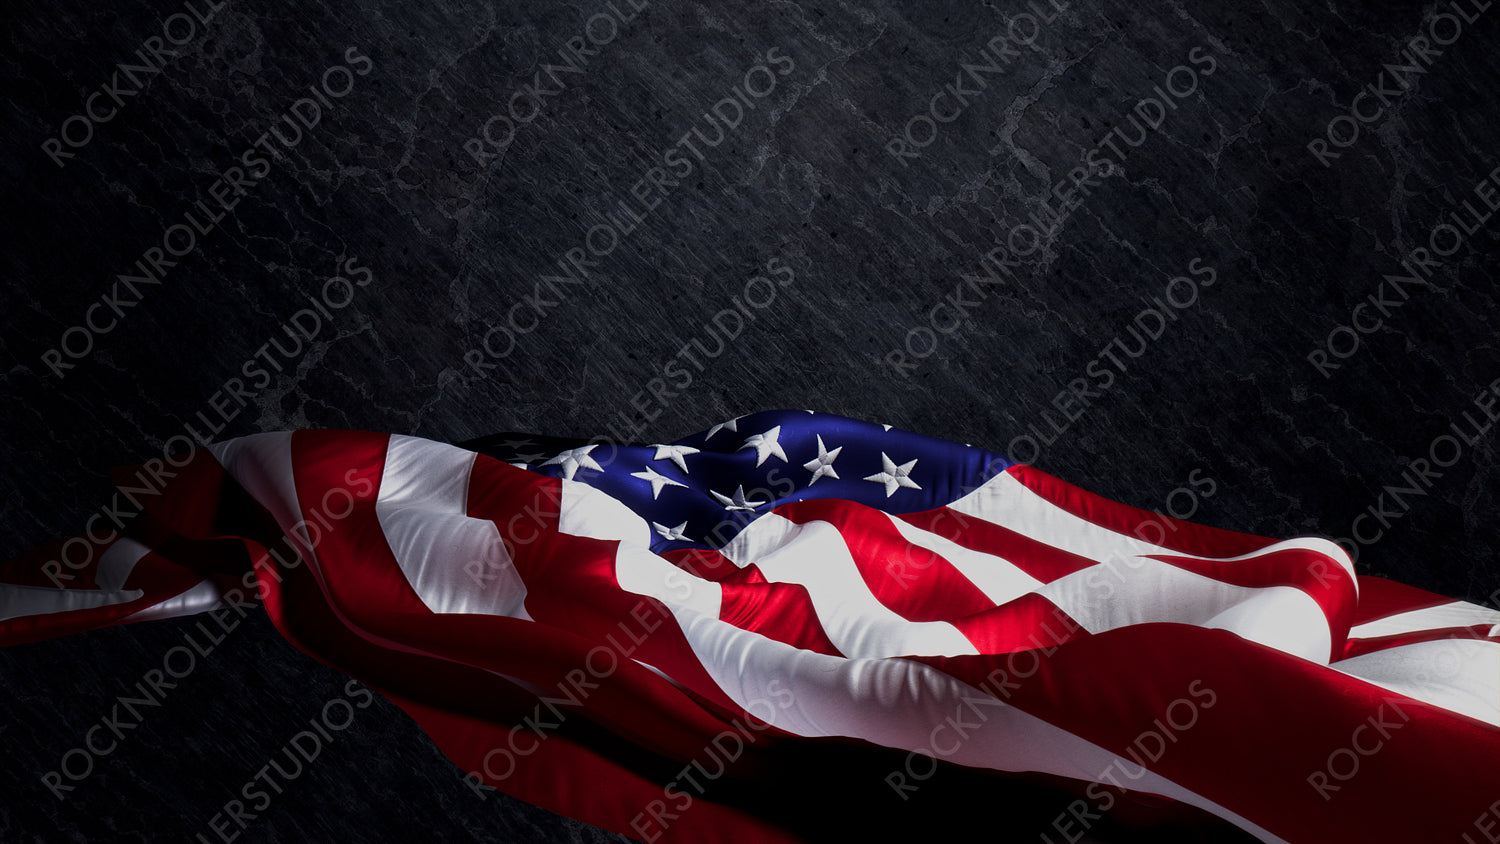 Presidents day Banner. Premium Holiday Background featuring American Flag on Black Stone with Copy-Space.